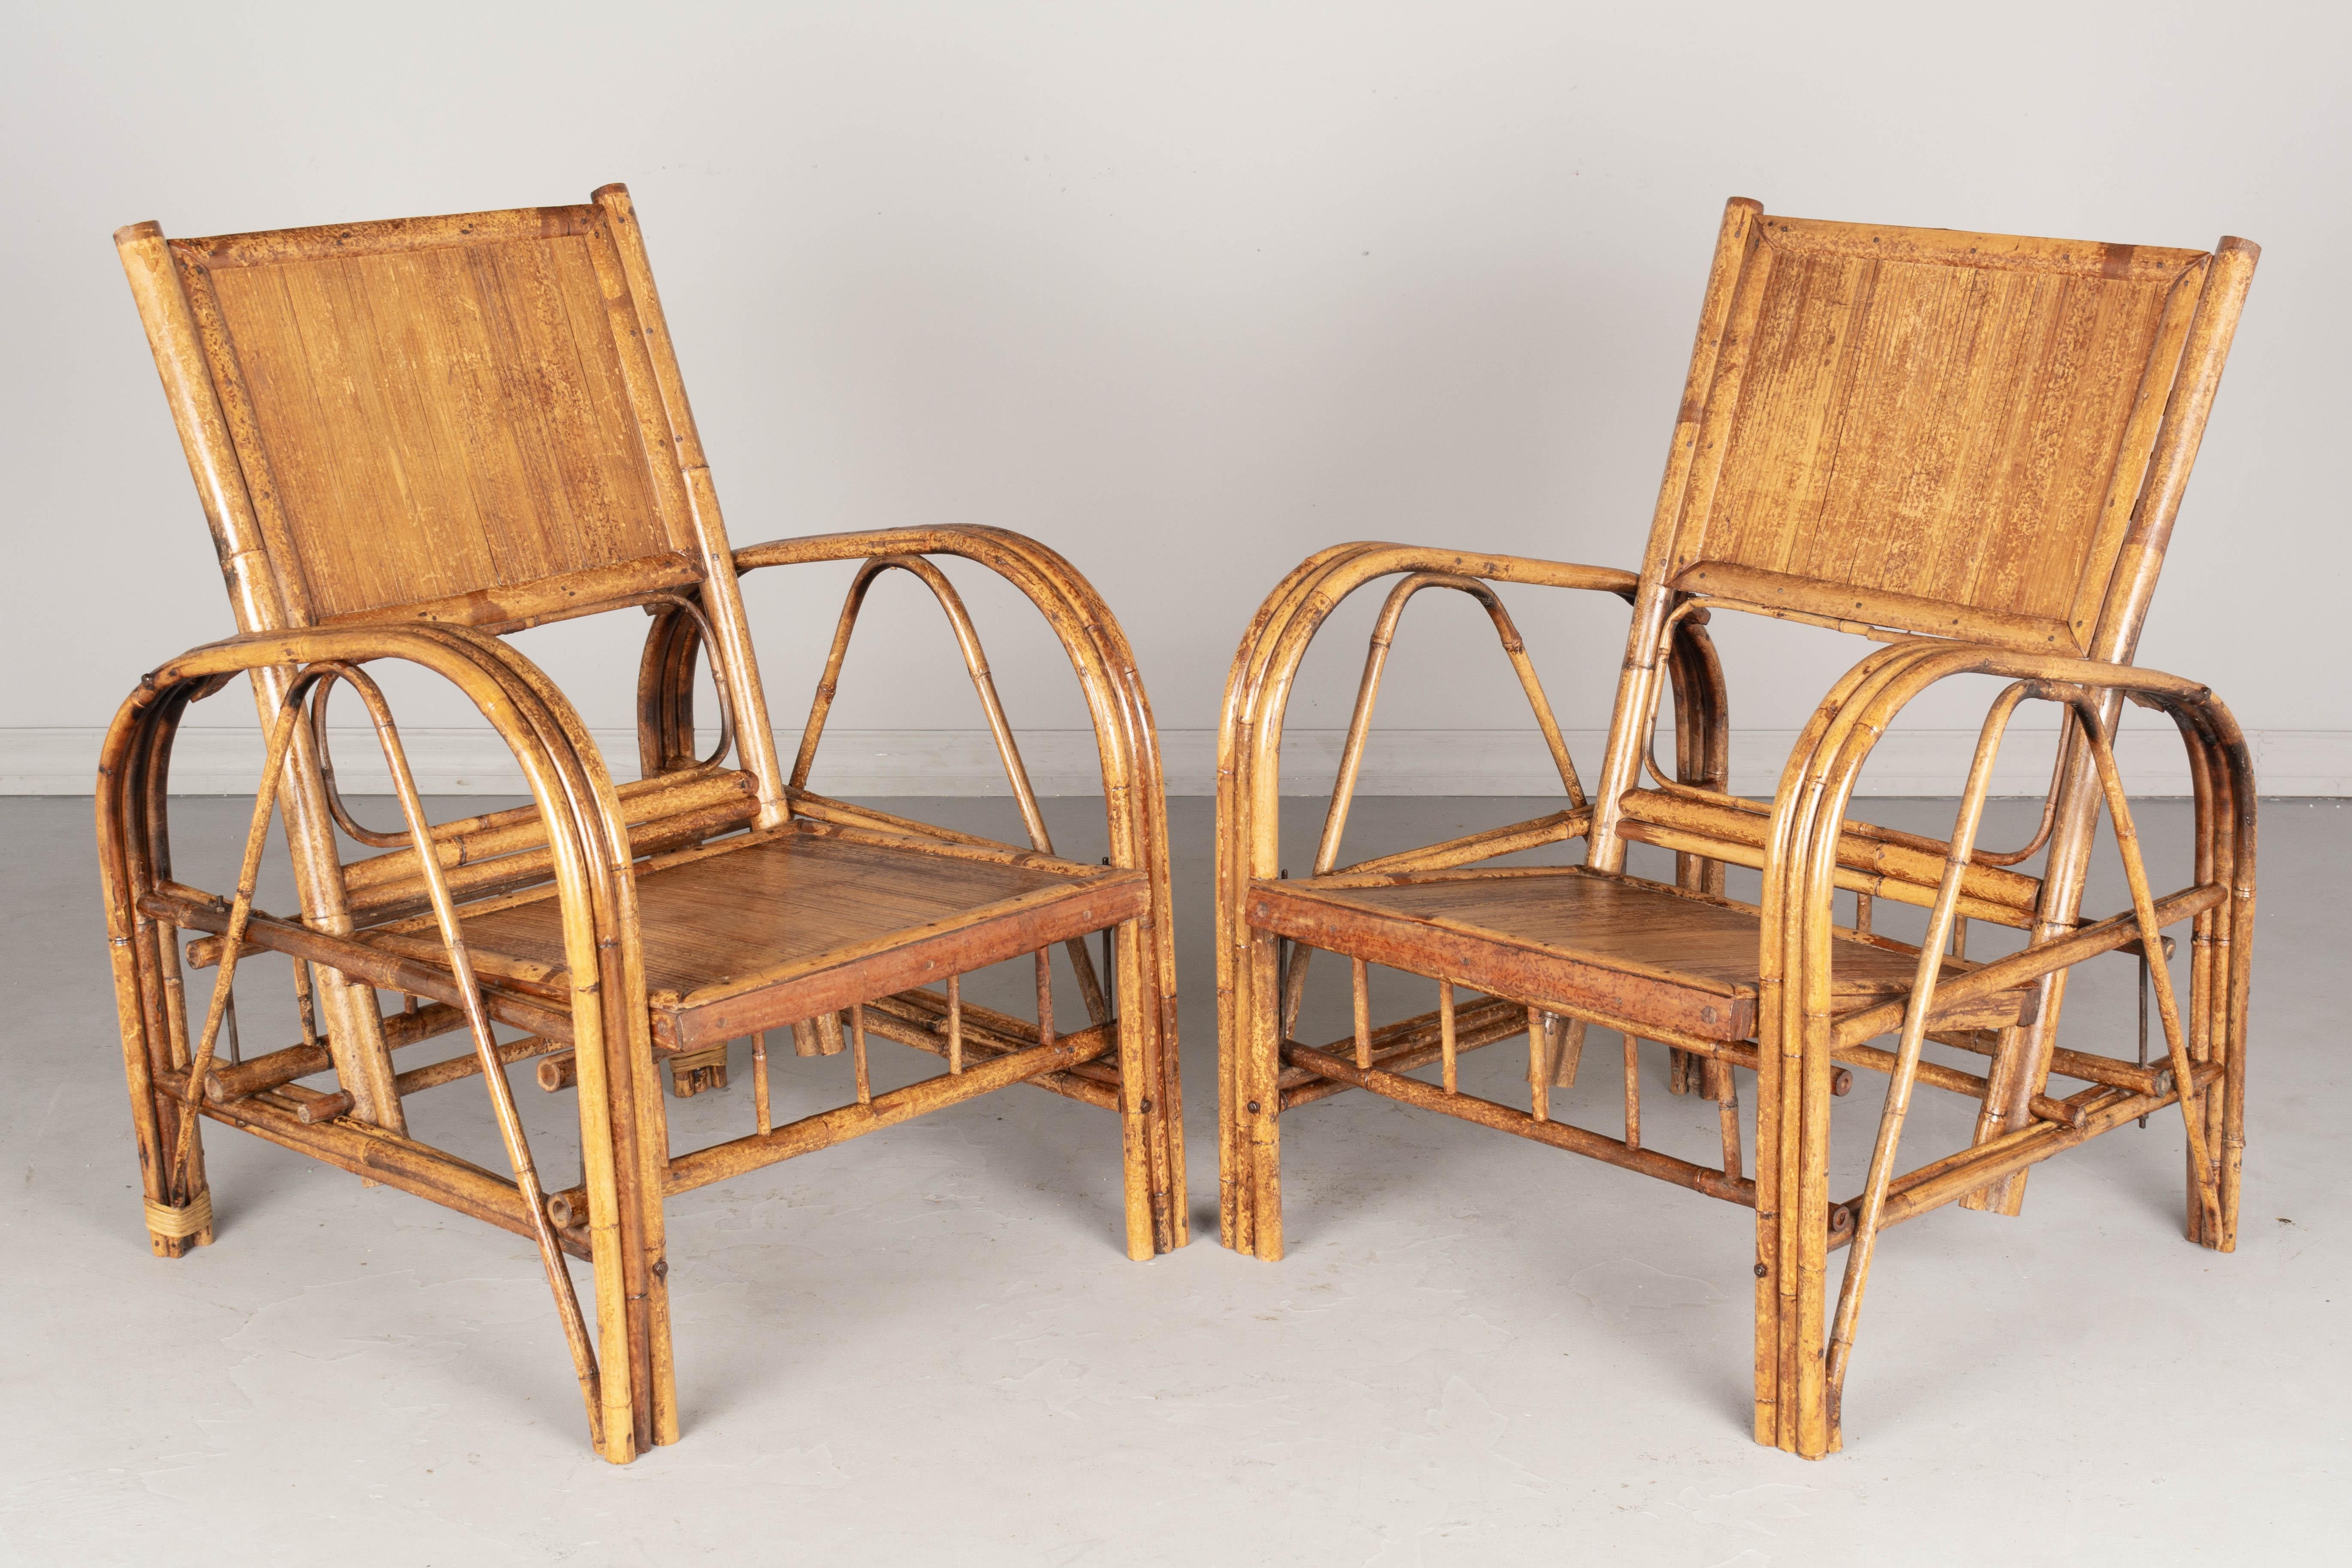 A pair of French Art Deco bamboo lounge or club chairs. Sturdy hand-crafted chairs with removable seat and back. No cushions. Casual boho California style, perfect for living room, sunroom or lanai. Please refer to photos for more details. Pictures